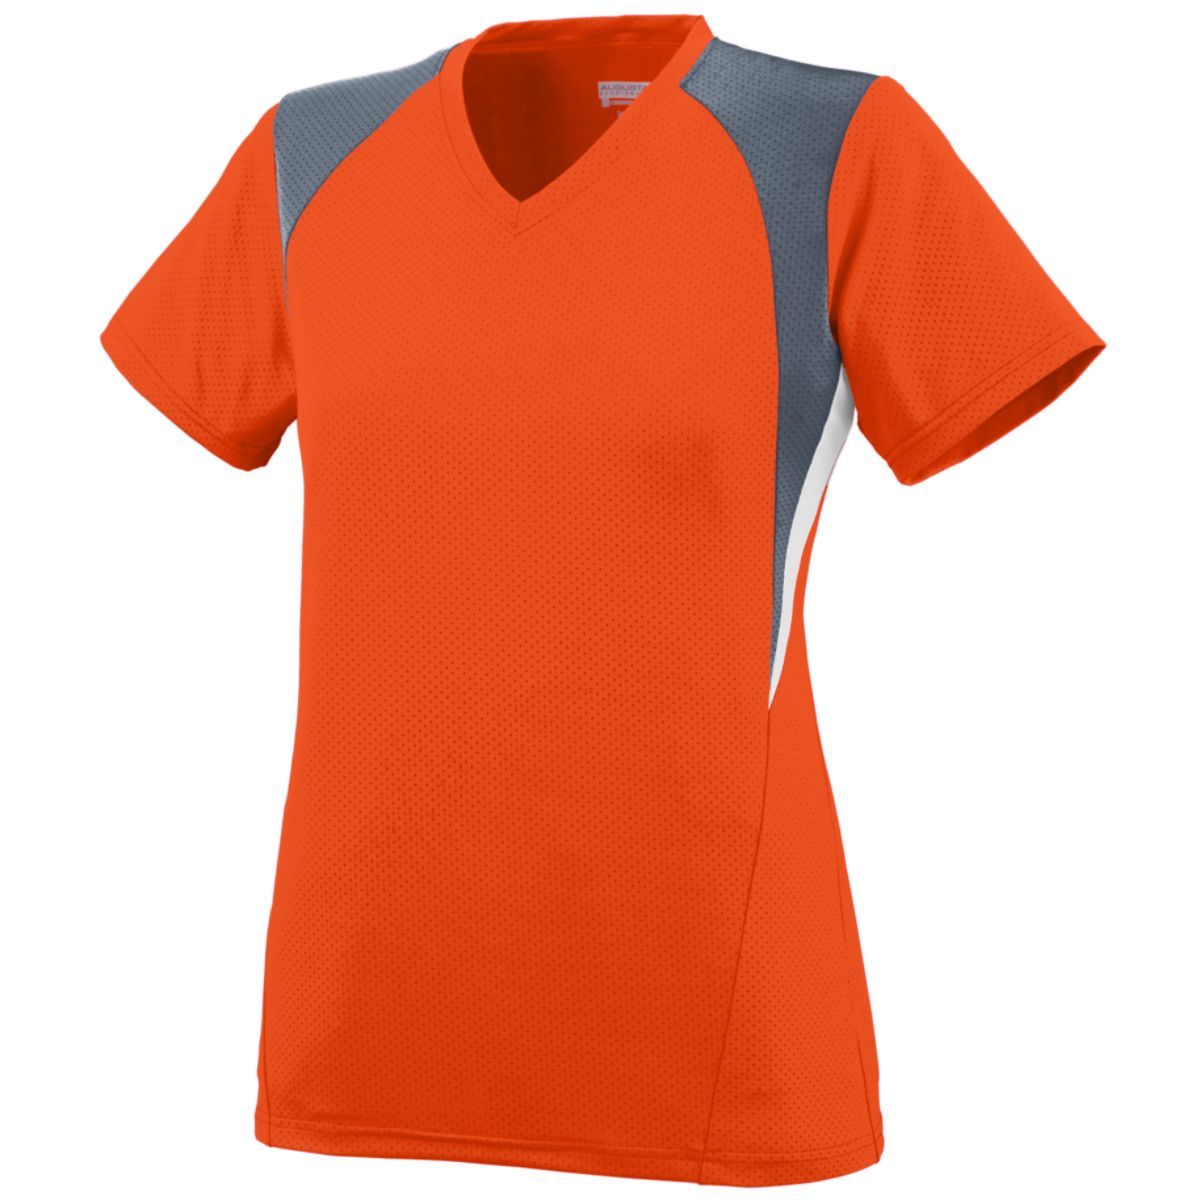 Augusta Sportswear Ladies Mystic Jersey in Orange/Graphite/White  -Part of the Ladies, Ladies-Jersey, Augusta-Products, Soccer, Shirts, All-Sports-1 product lines at KanaleyCreations.com